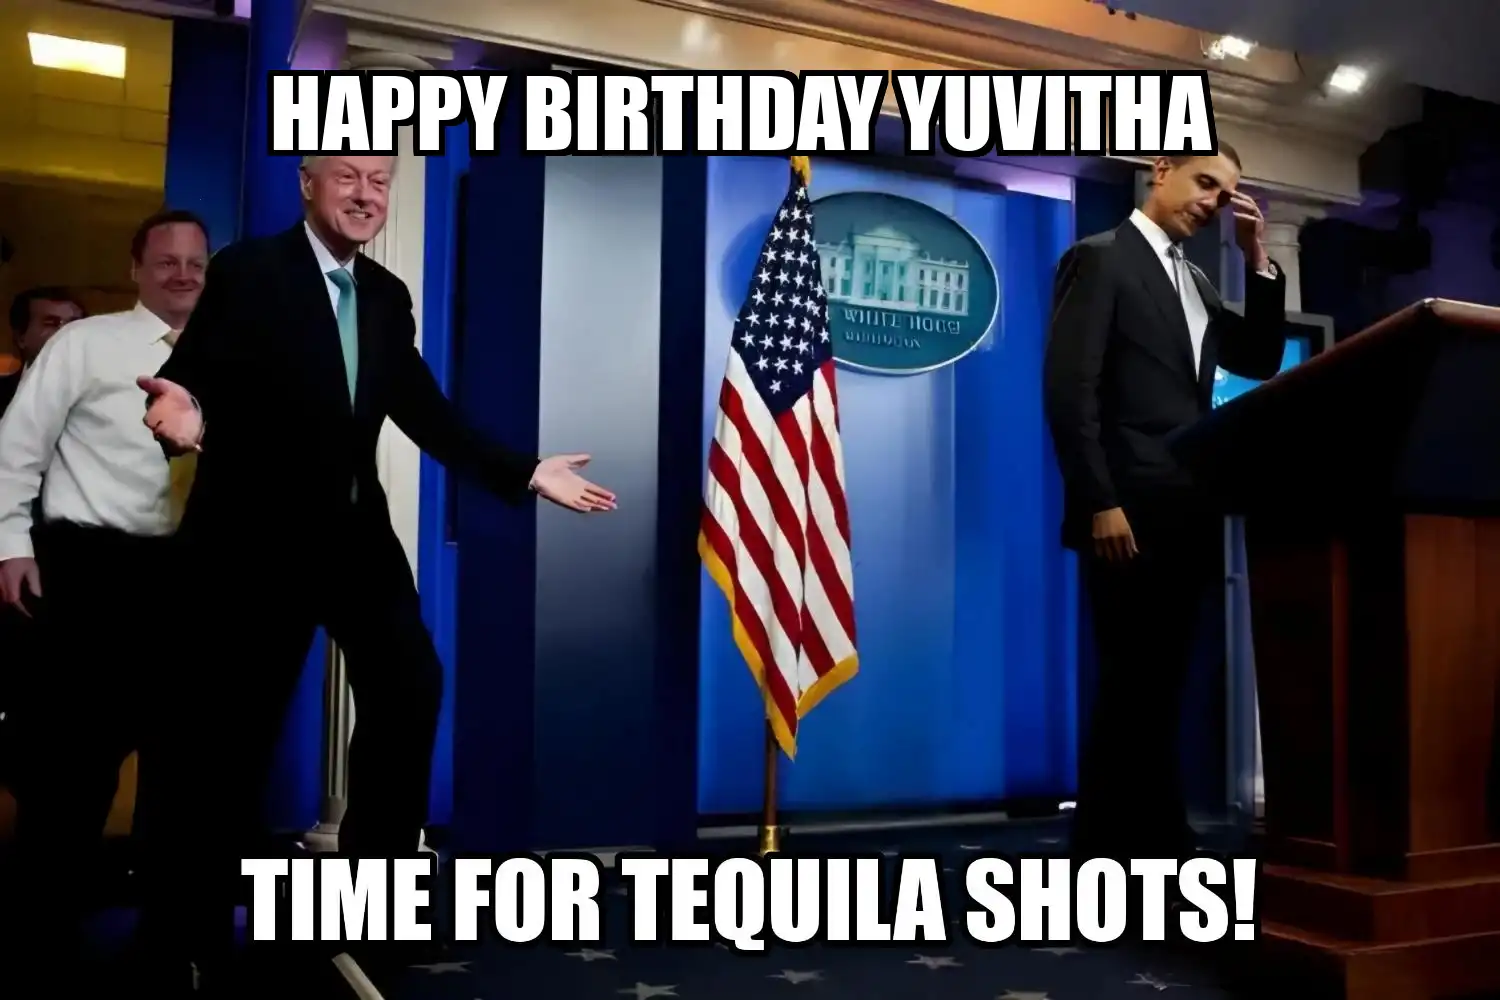 Happy Birthday Yuvitha Time For Tequila Shots Memes